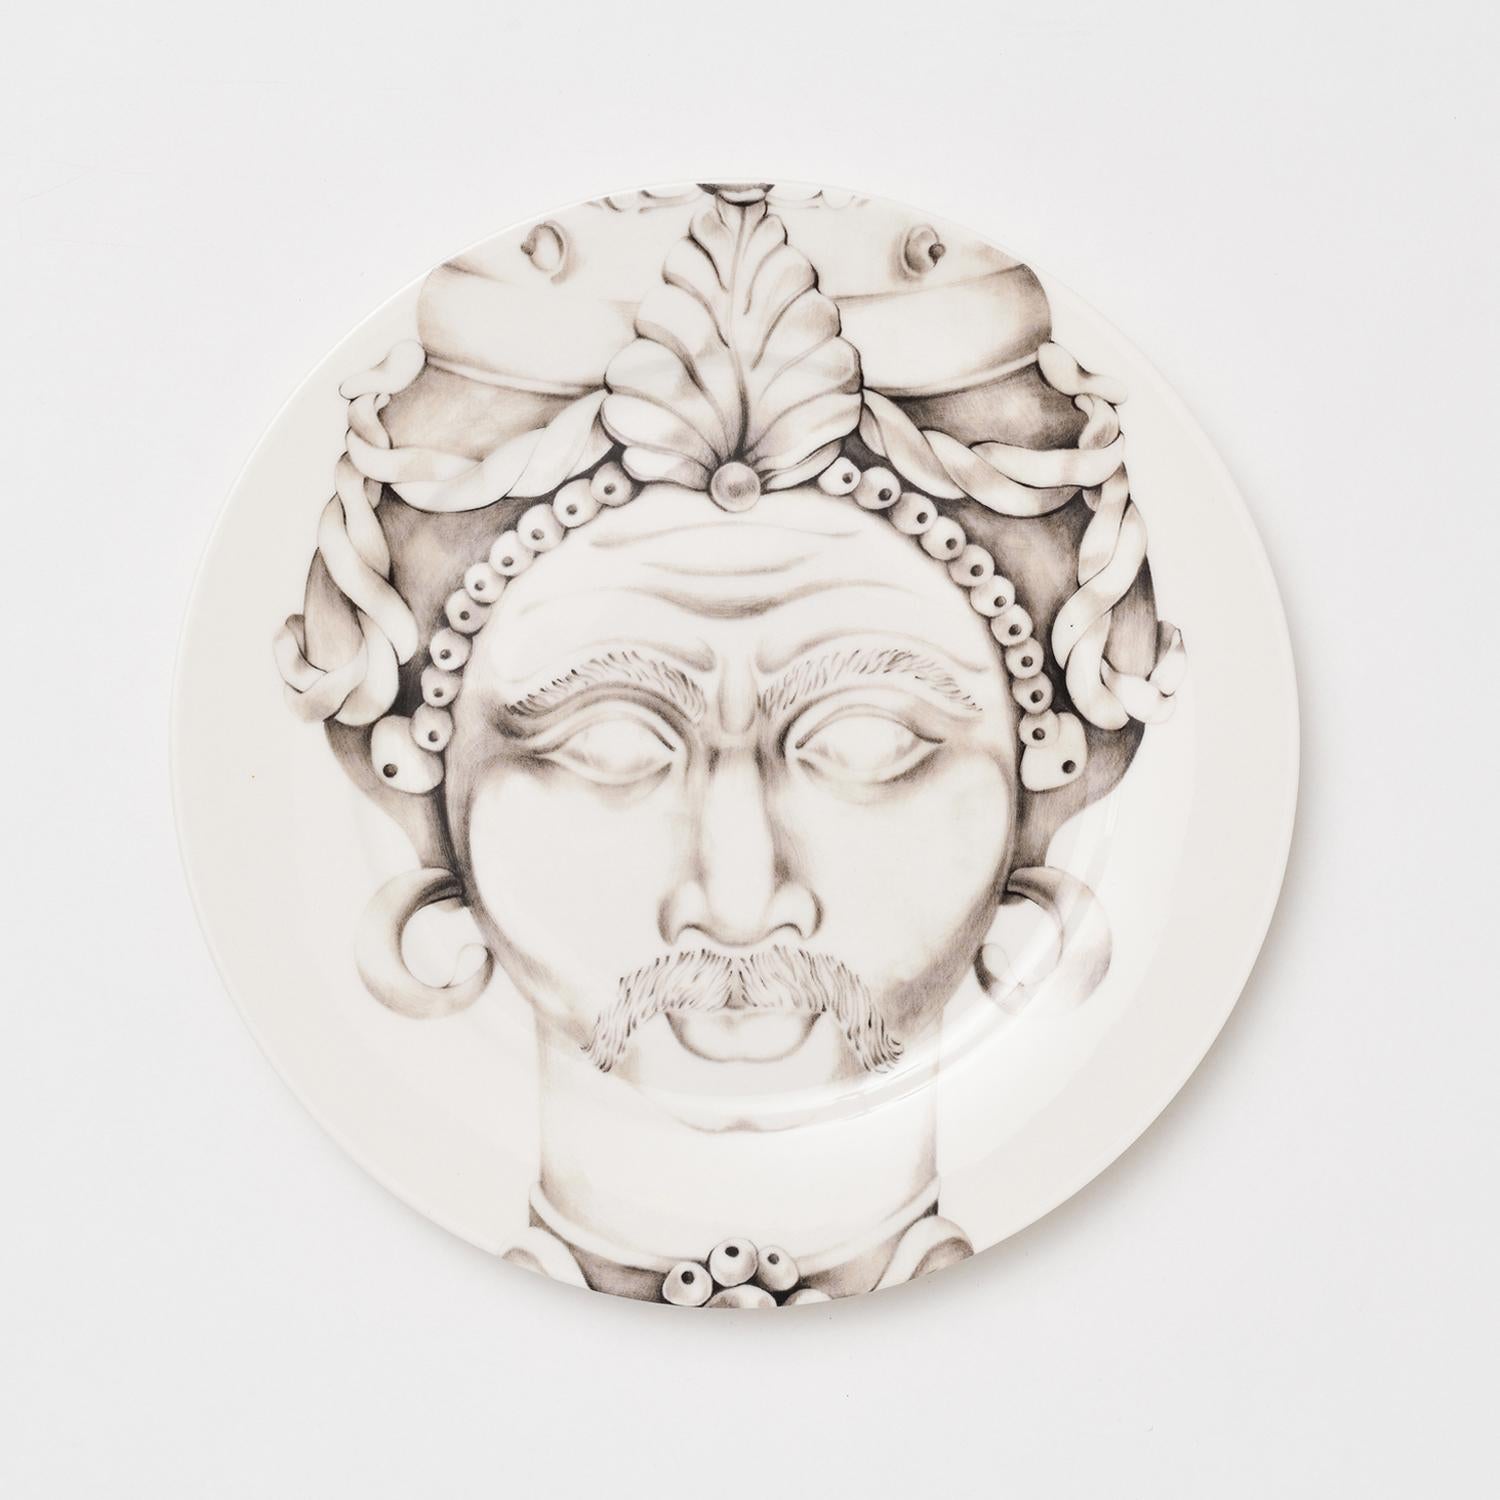 These captivating Alejandro dinner plates belong to the Teste di Moro Collection of truly unique Italian dining ware. Inspired by the Sicilian Moor's Head tradition, these incredibly detailed plates are entirely handcrafted in refined porcelain.